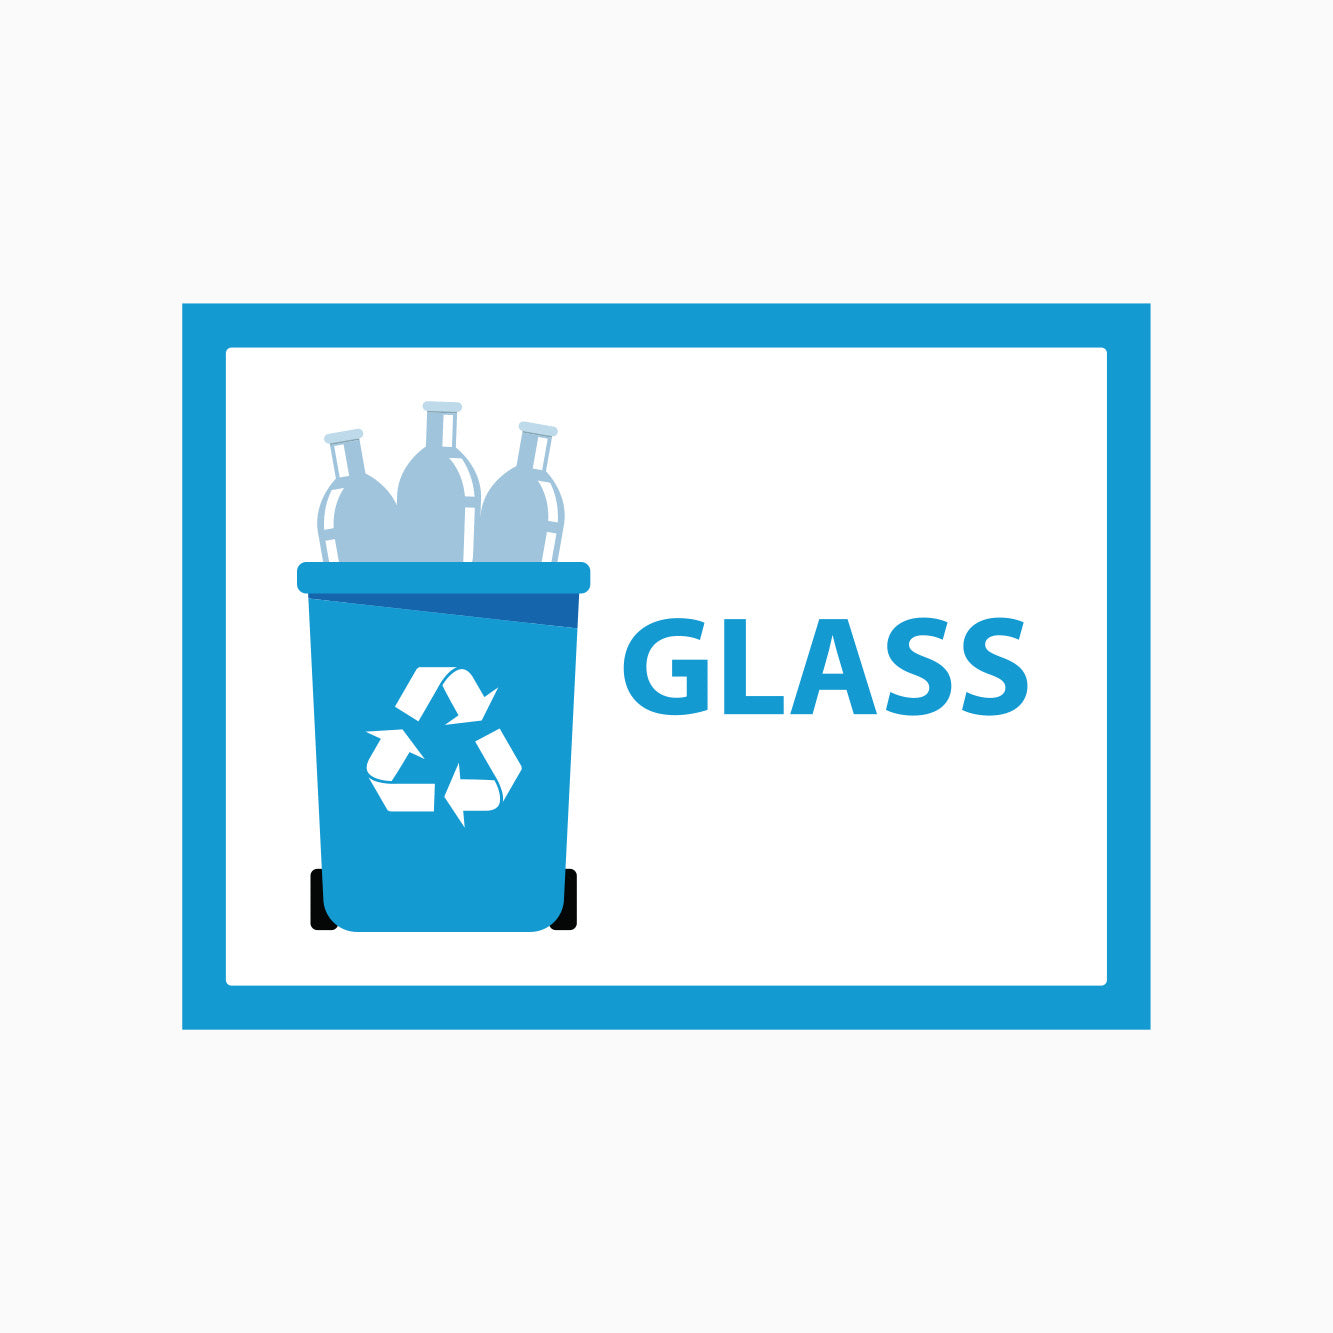 Recycle Glass Only Sign - BIN SIGNS - RECYCLE SIGNS - GET SIGNS